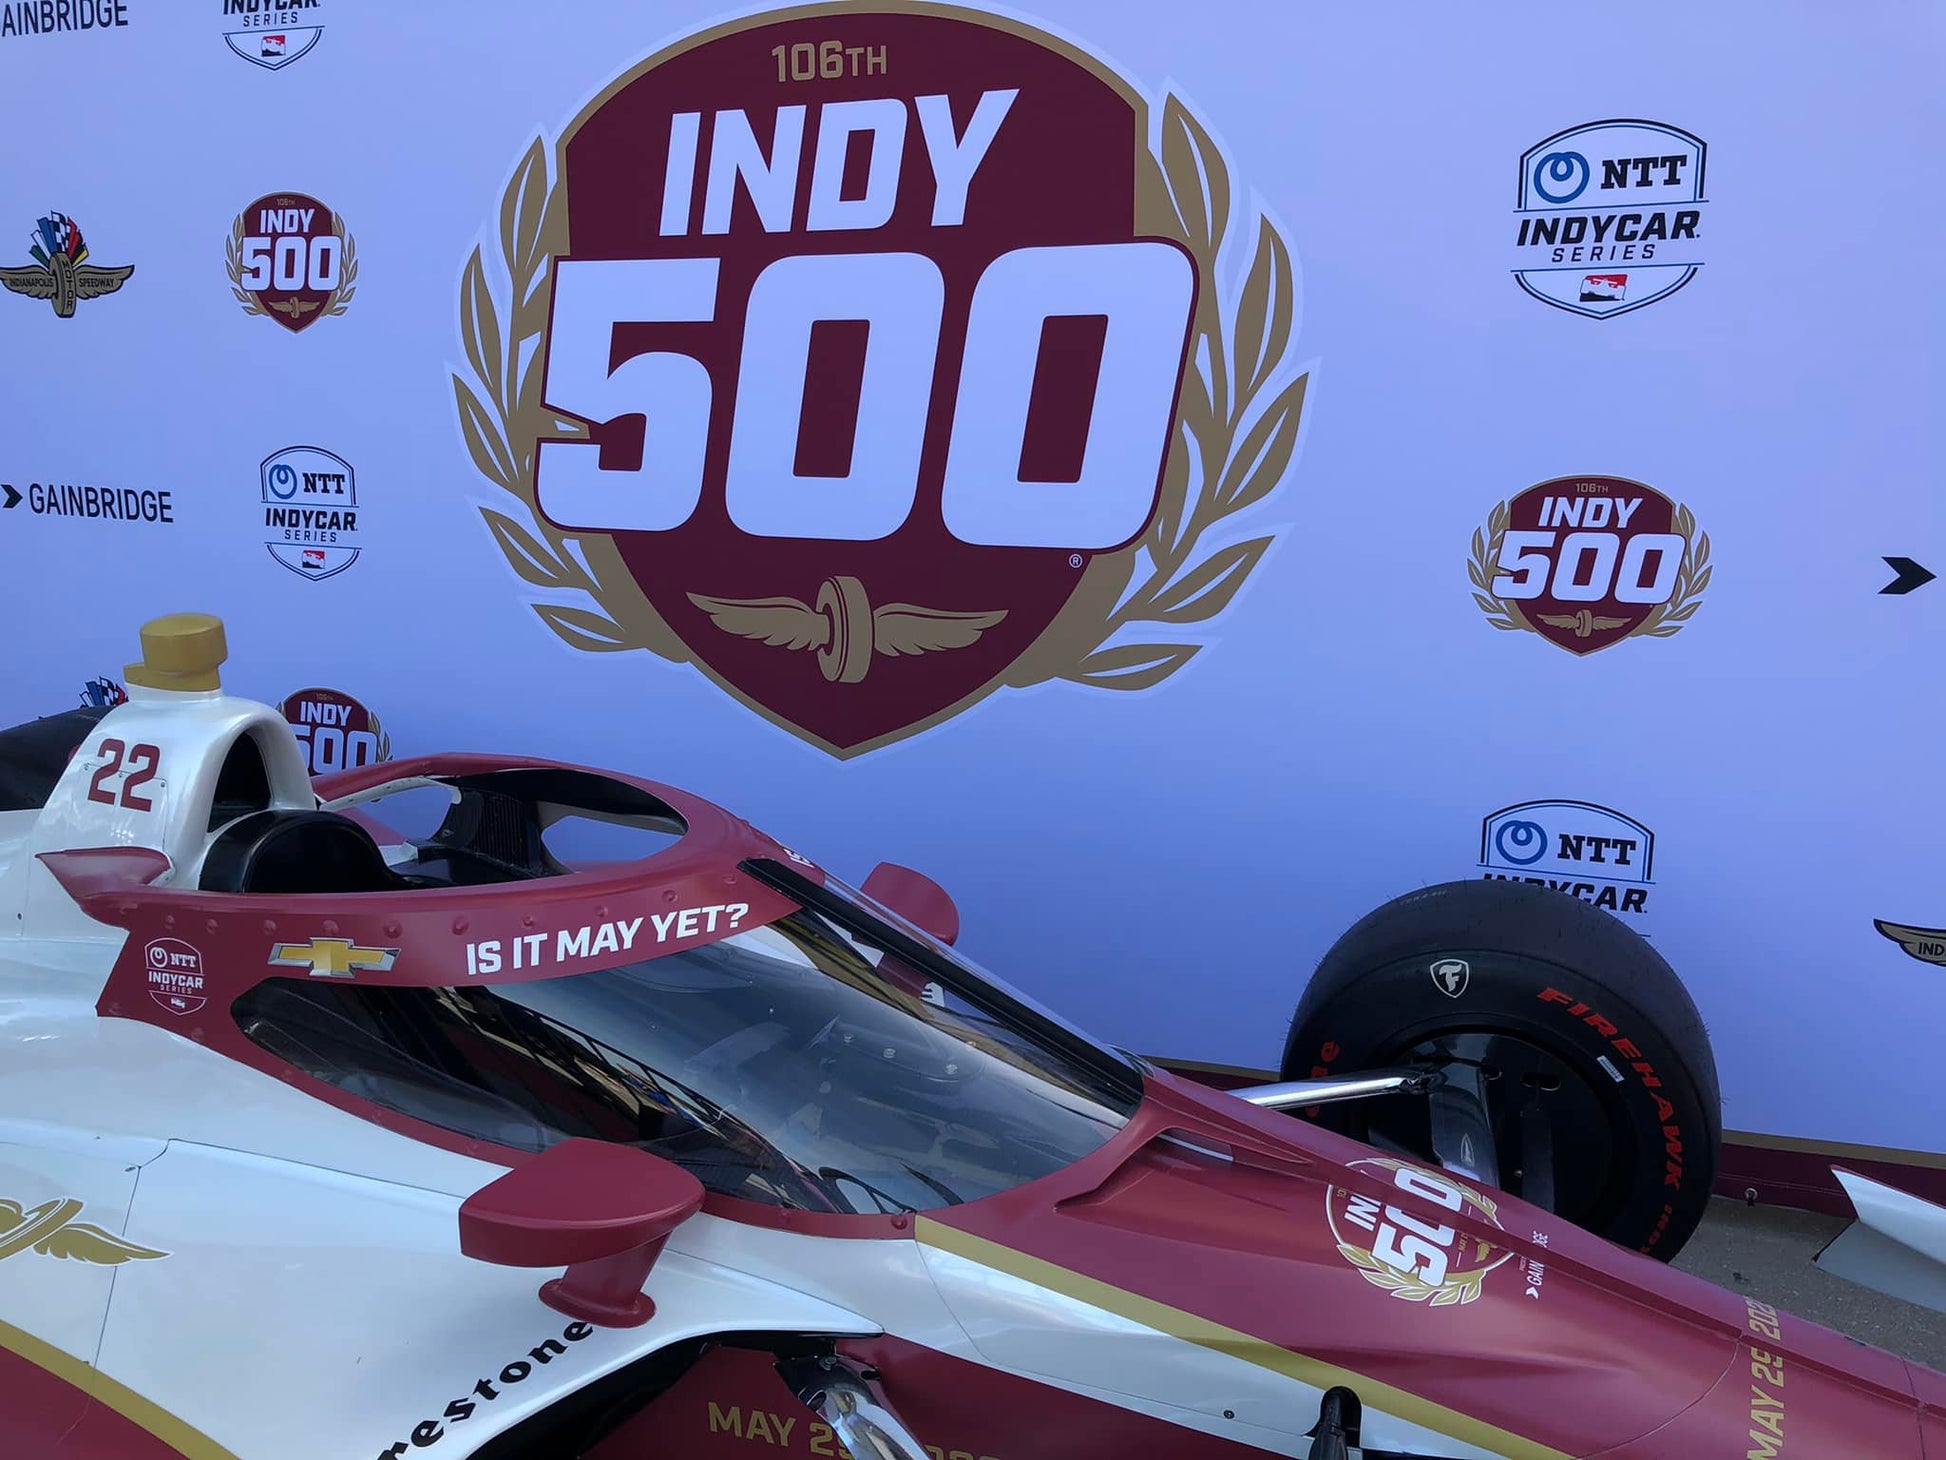 Indianapolis 500 : This is May ! This is Indy ! Le plus grand spectacle de sport automobile